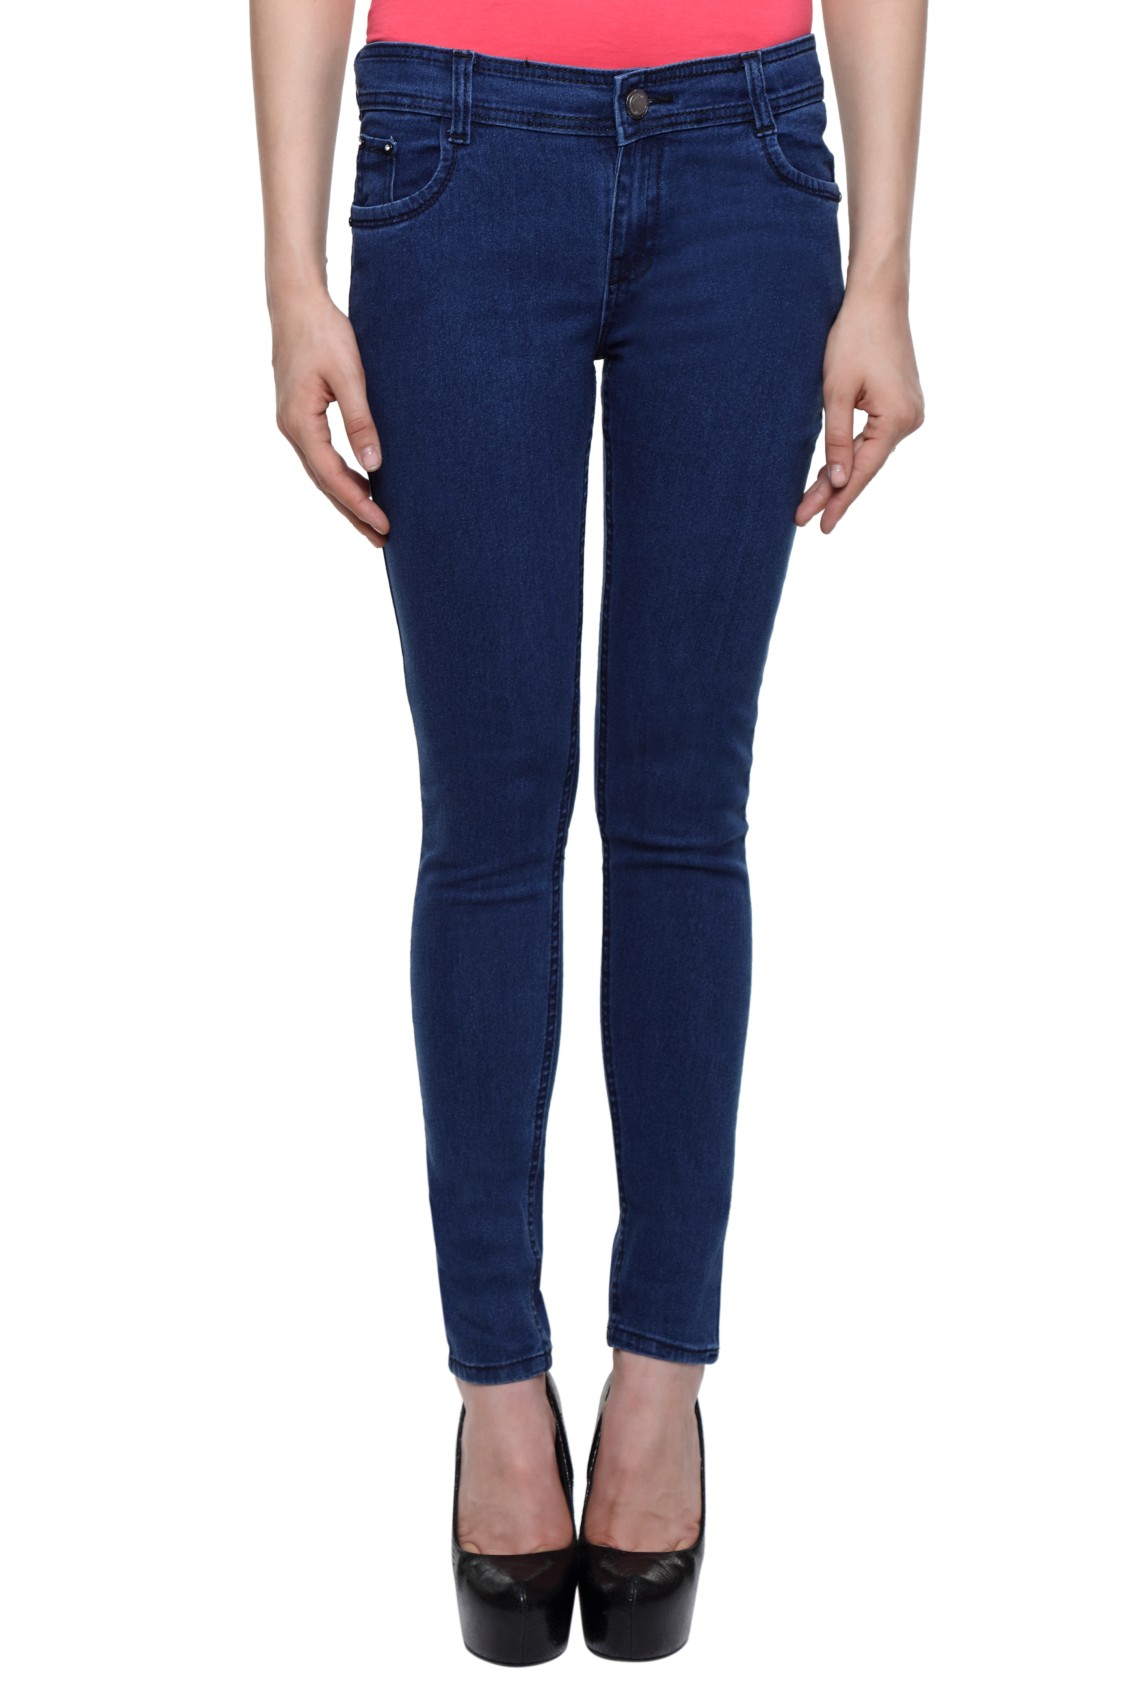 Buy Wajbee Blue Womens Stretchable Jeans Online @ ₹598 from ShopClues